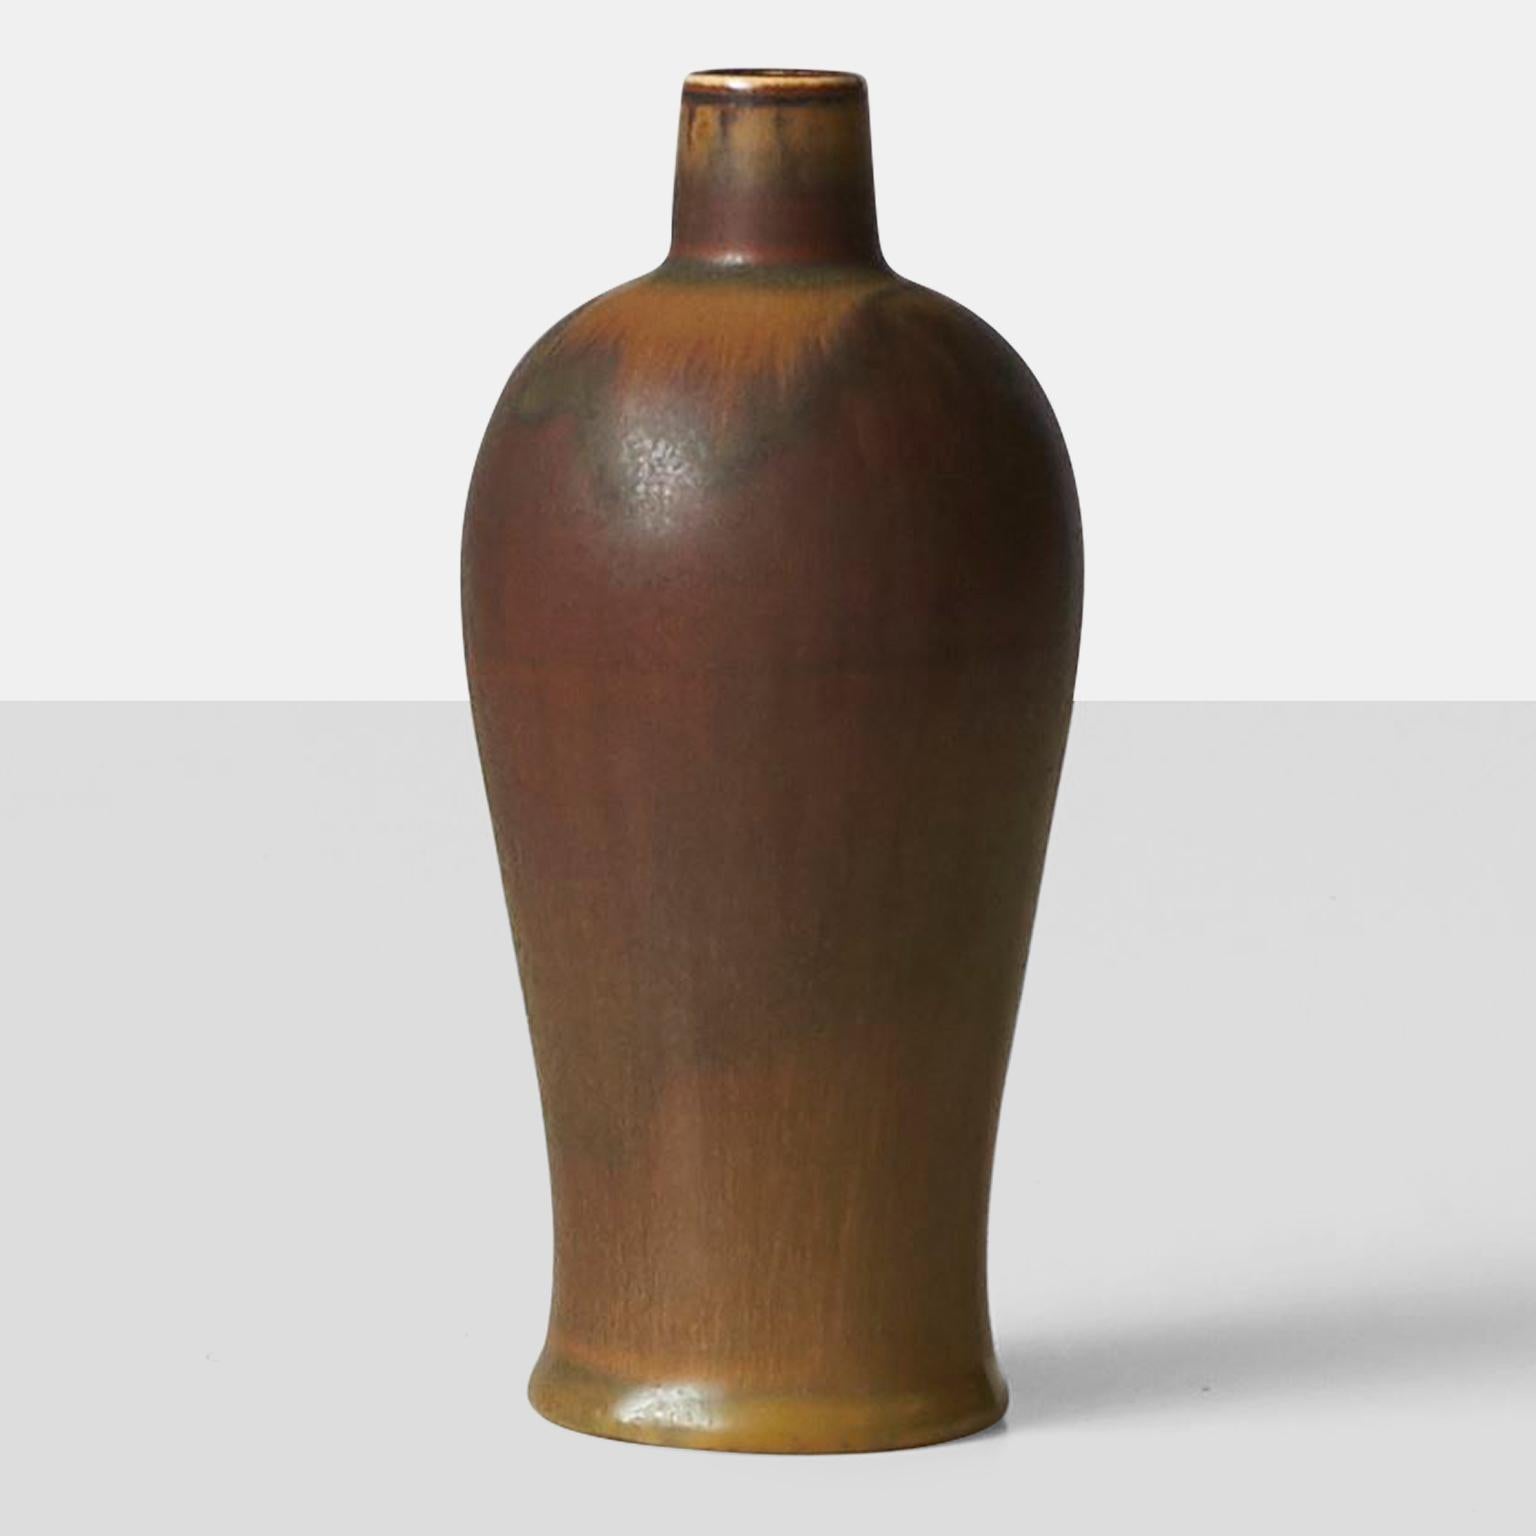 A ceramic vase by Swedish designer Gunnar Nylund. Glazed in a palette of earth tones, the vase is signed Nylund and marked Rorstrand on the base.